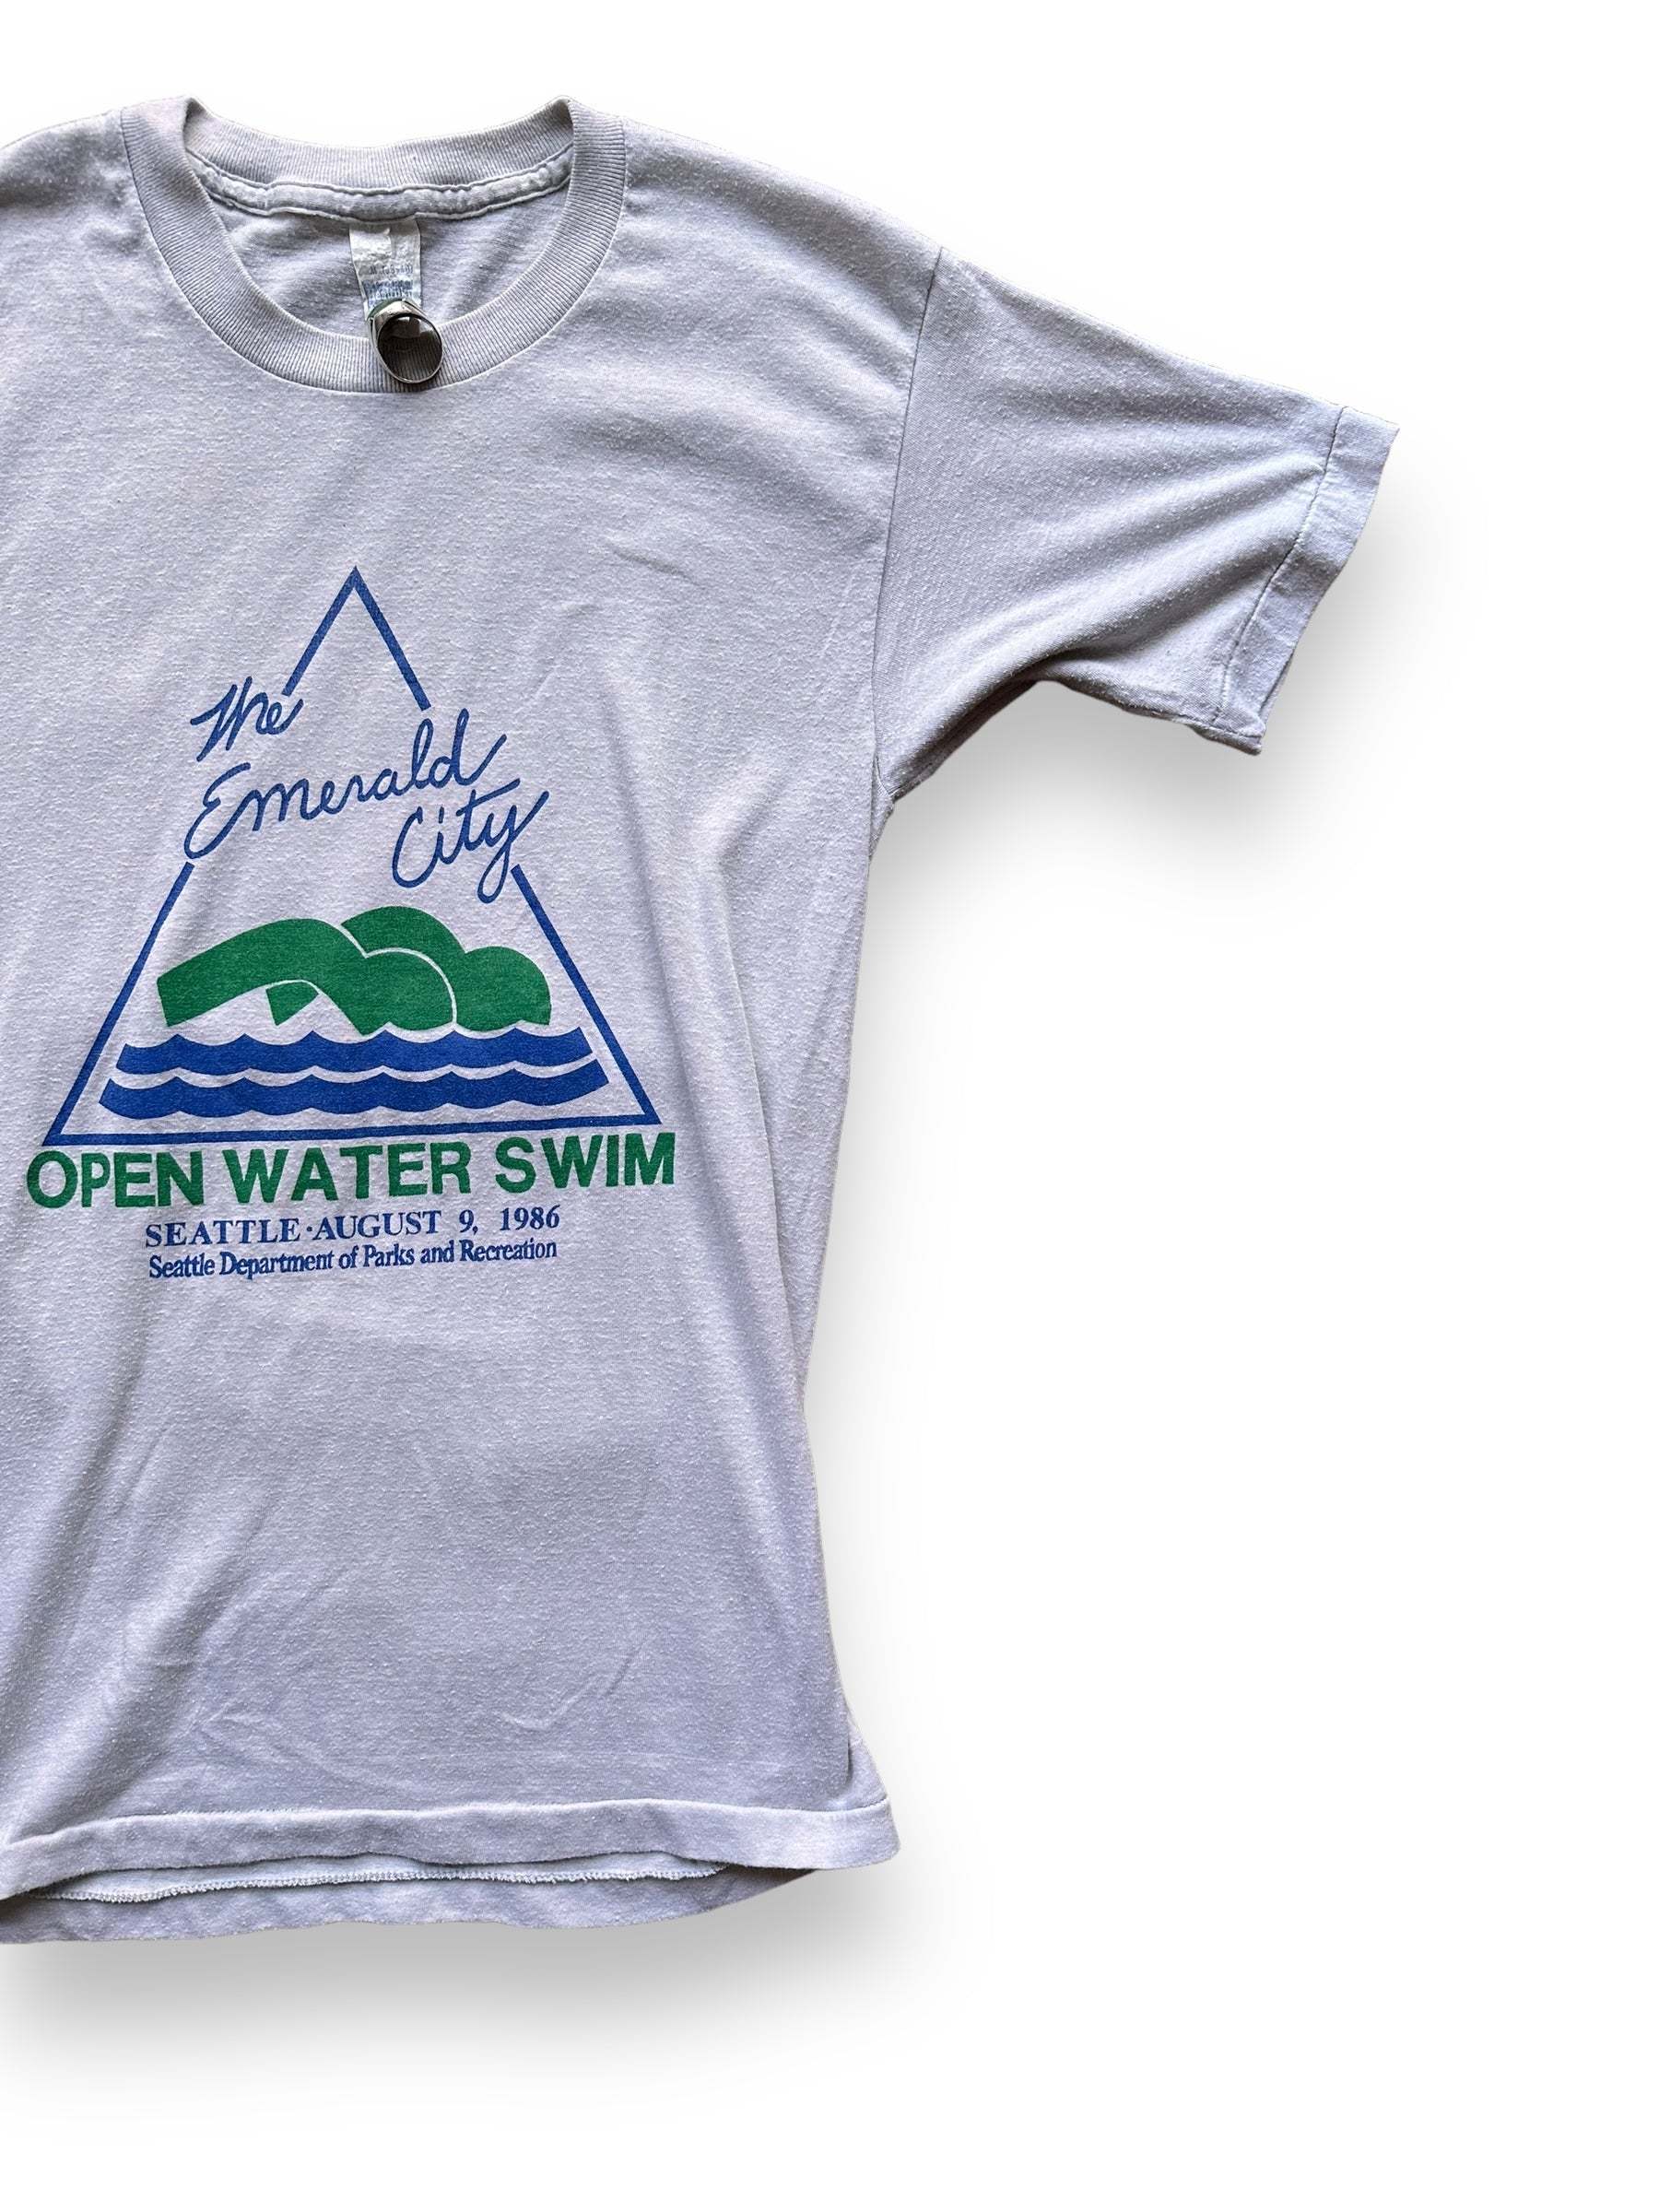 Front Left View of Vintage Emerald City Open Water Swim Tee SZ M | Barn Owl Vintage Tees | Vintage Graphic Tees Seattle